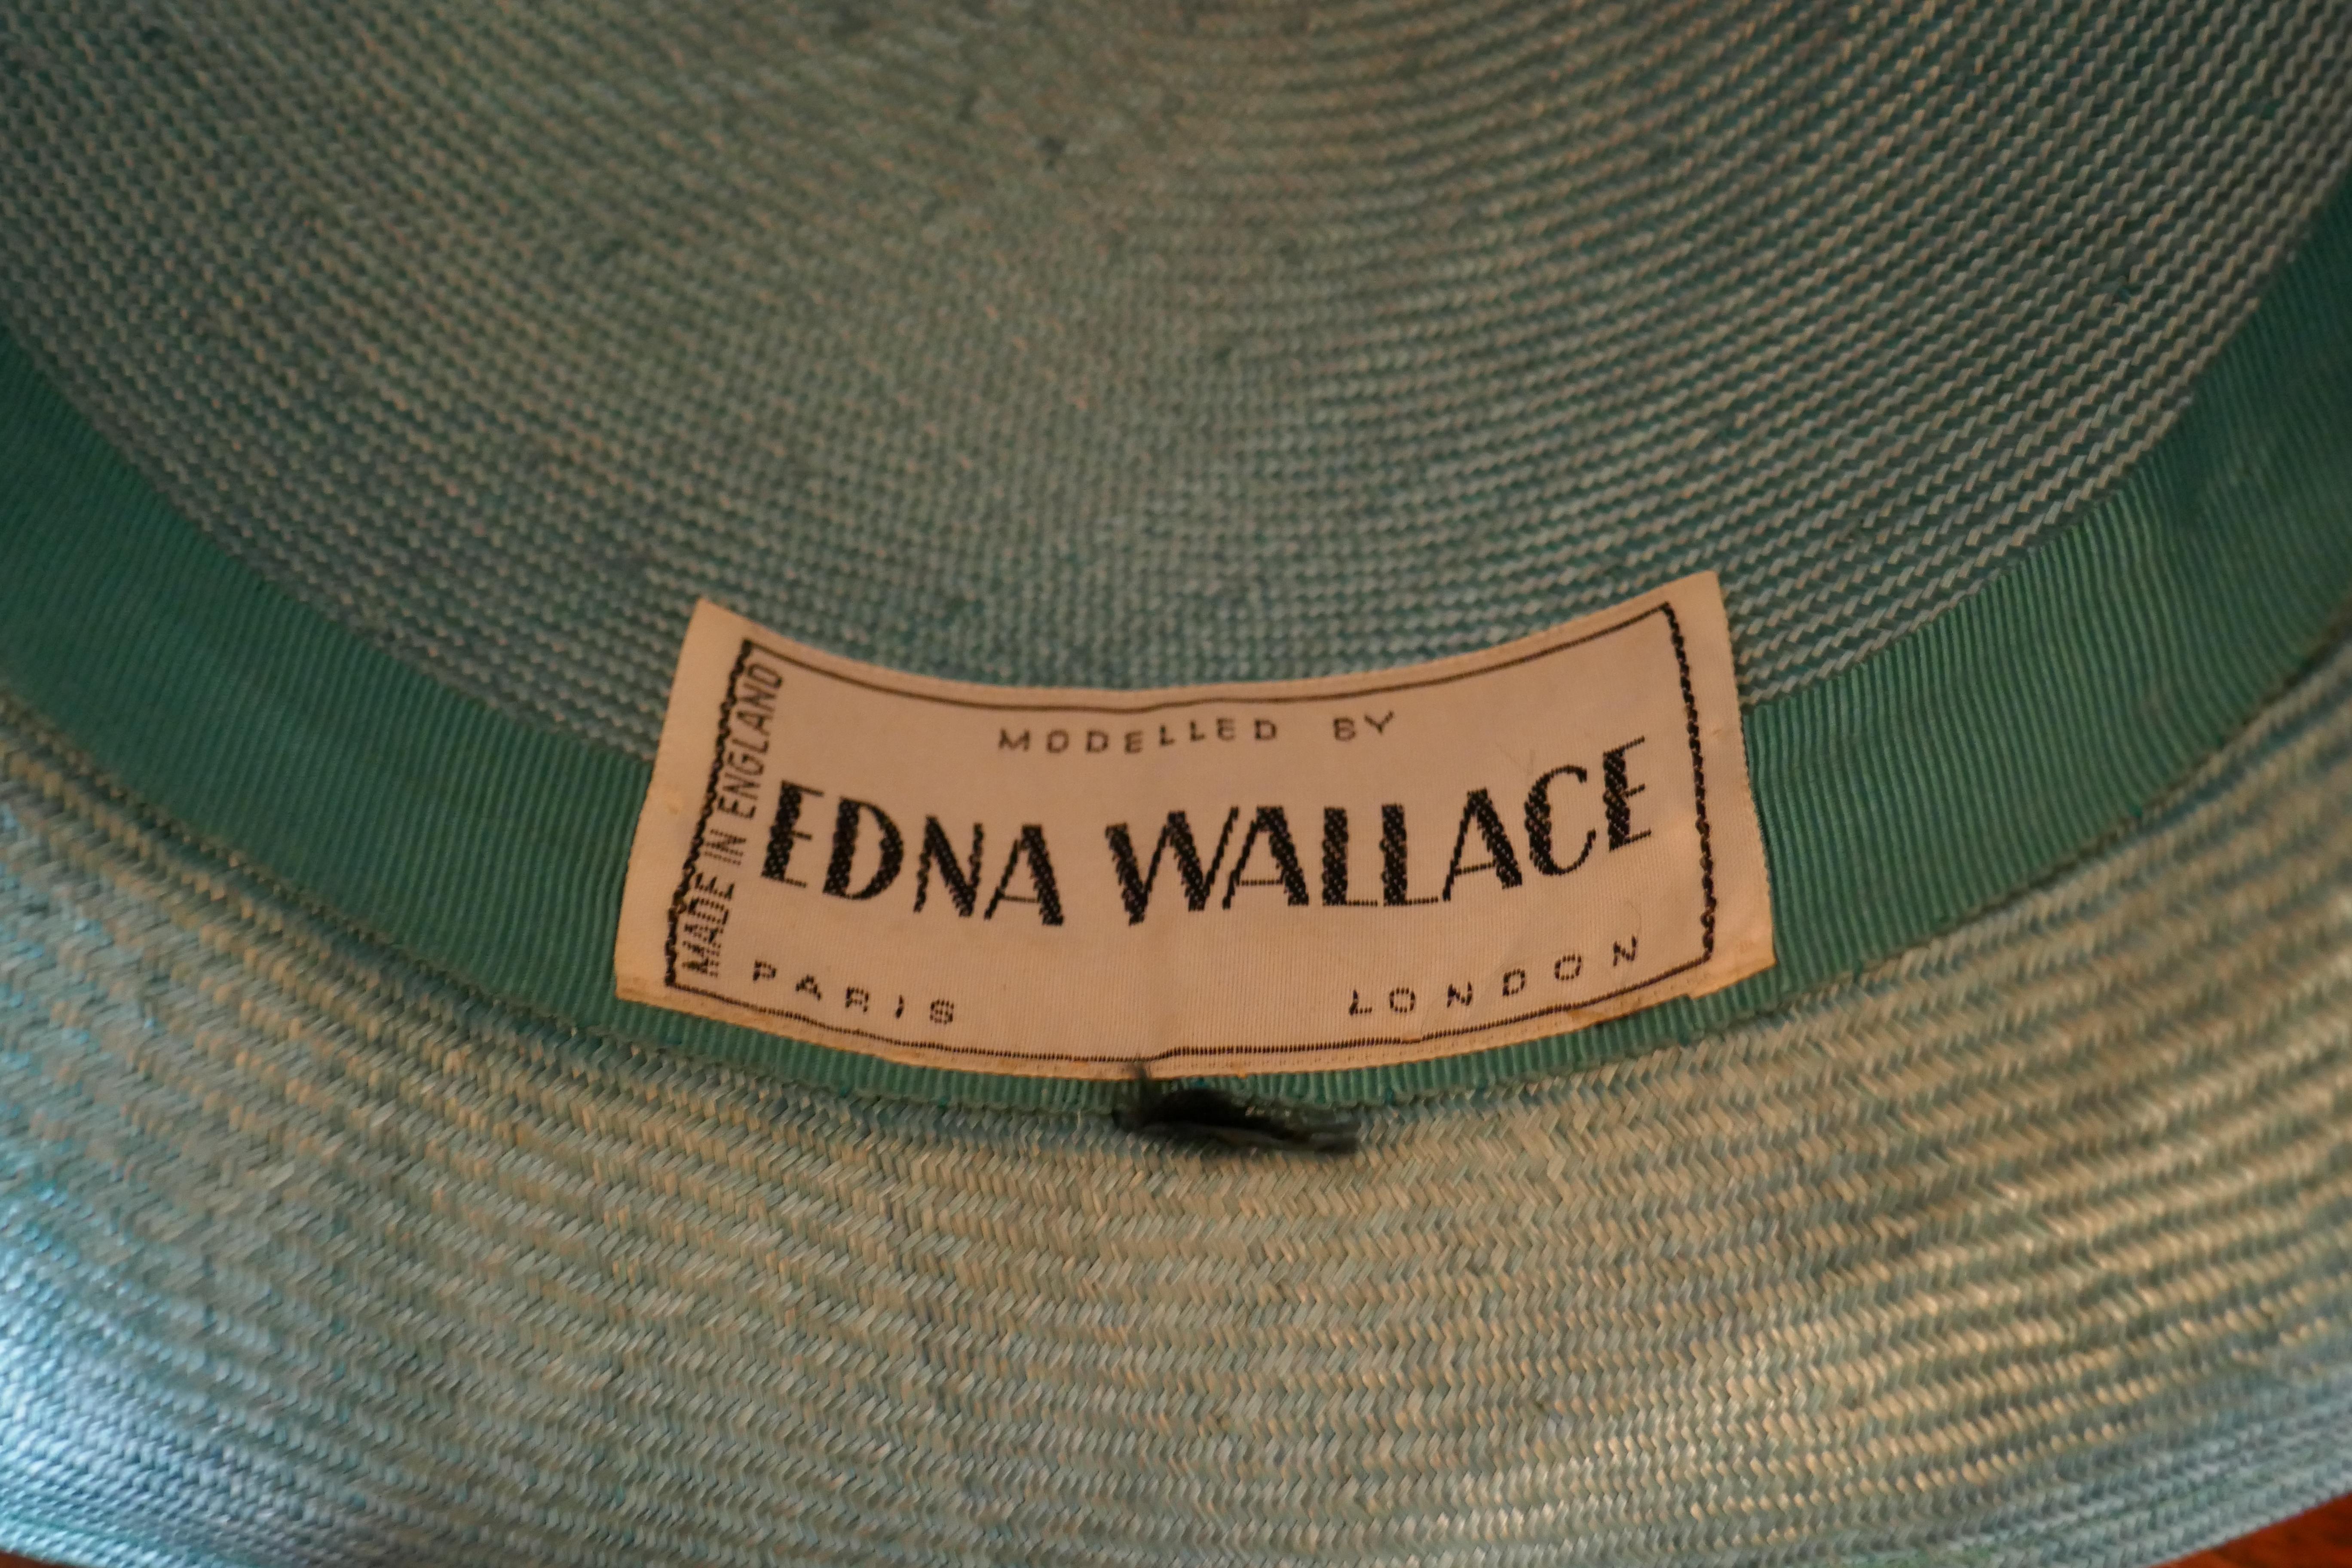 Original 1960s Duck Egg Green Veiled Shiny Panama Hat by Edna Wallace 2